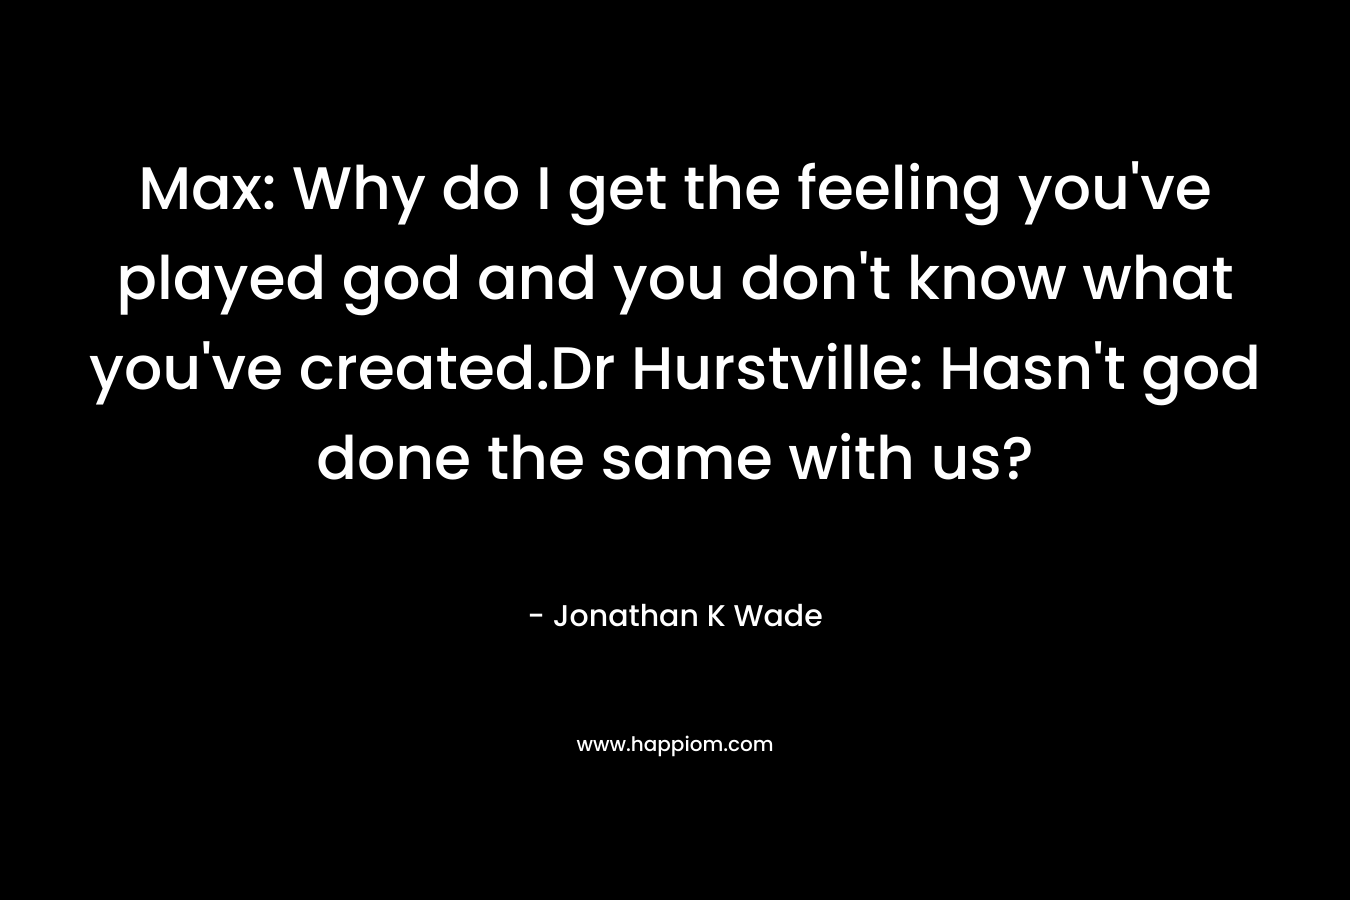 Max: Why do I get the feeling you’ve played god and you don’t know what you’ve created.Dr Hurstville: Hasn’t god done the same with us? – Jonathan K Wade